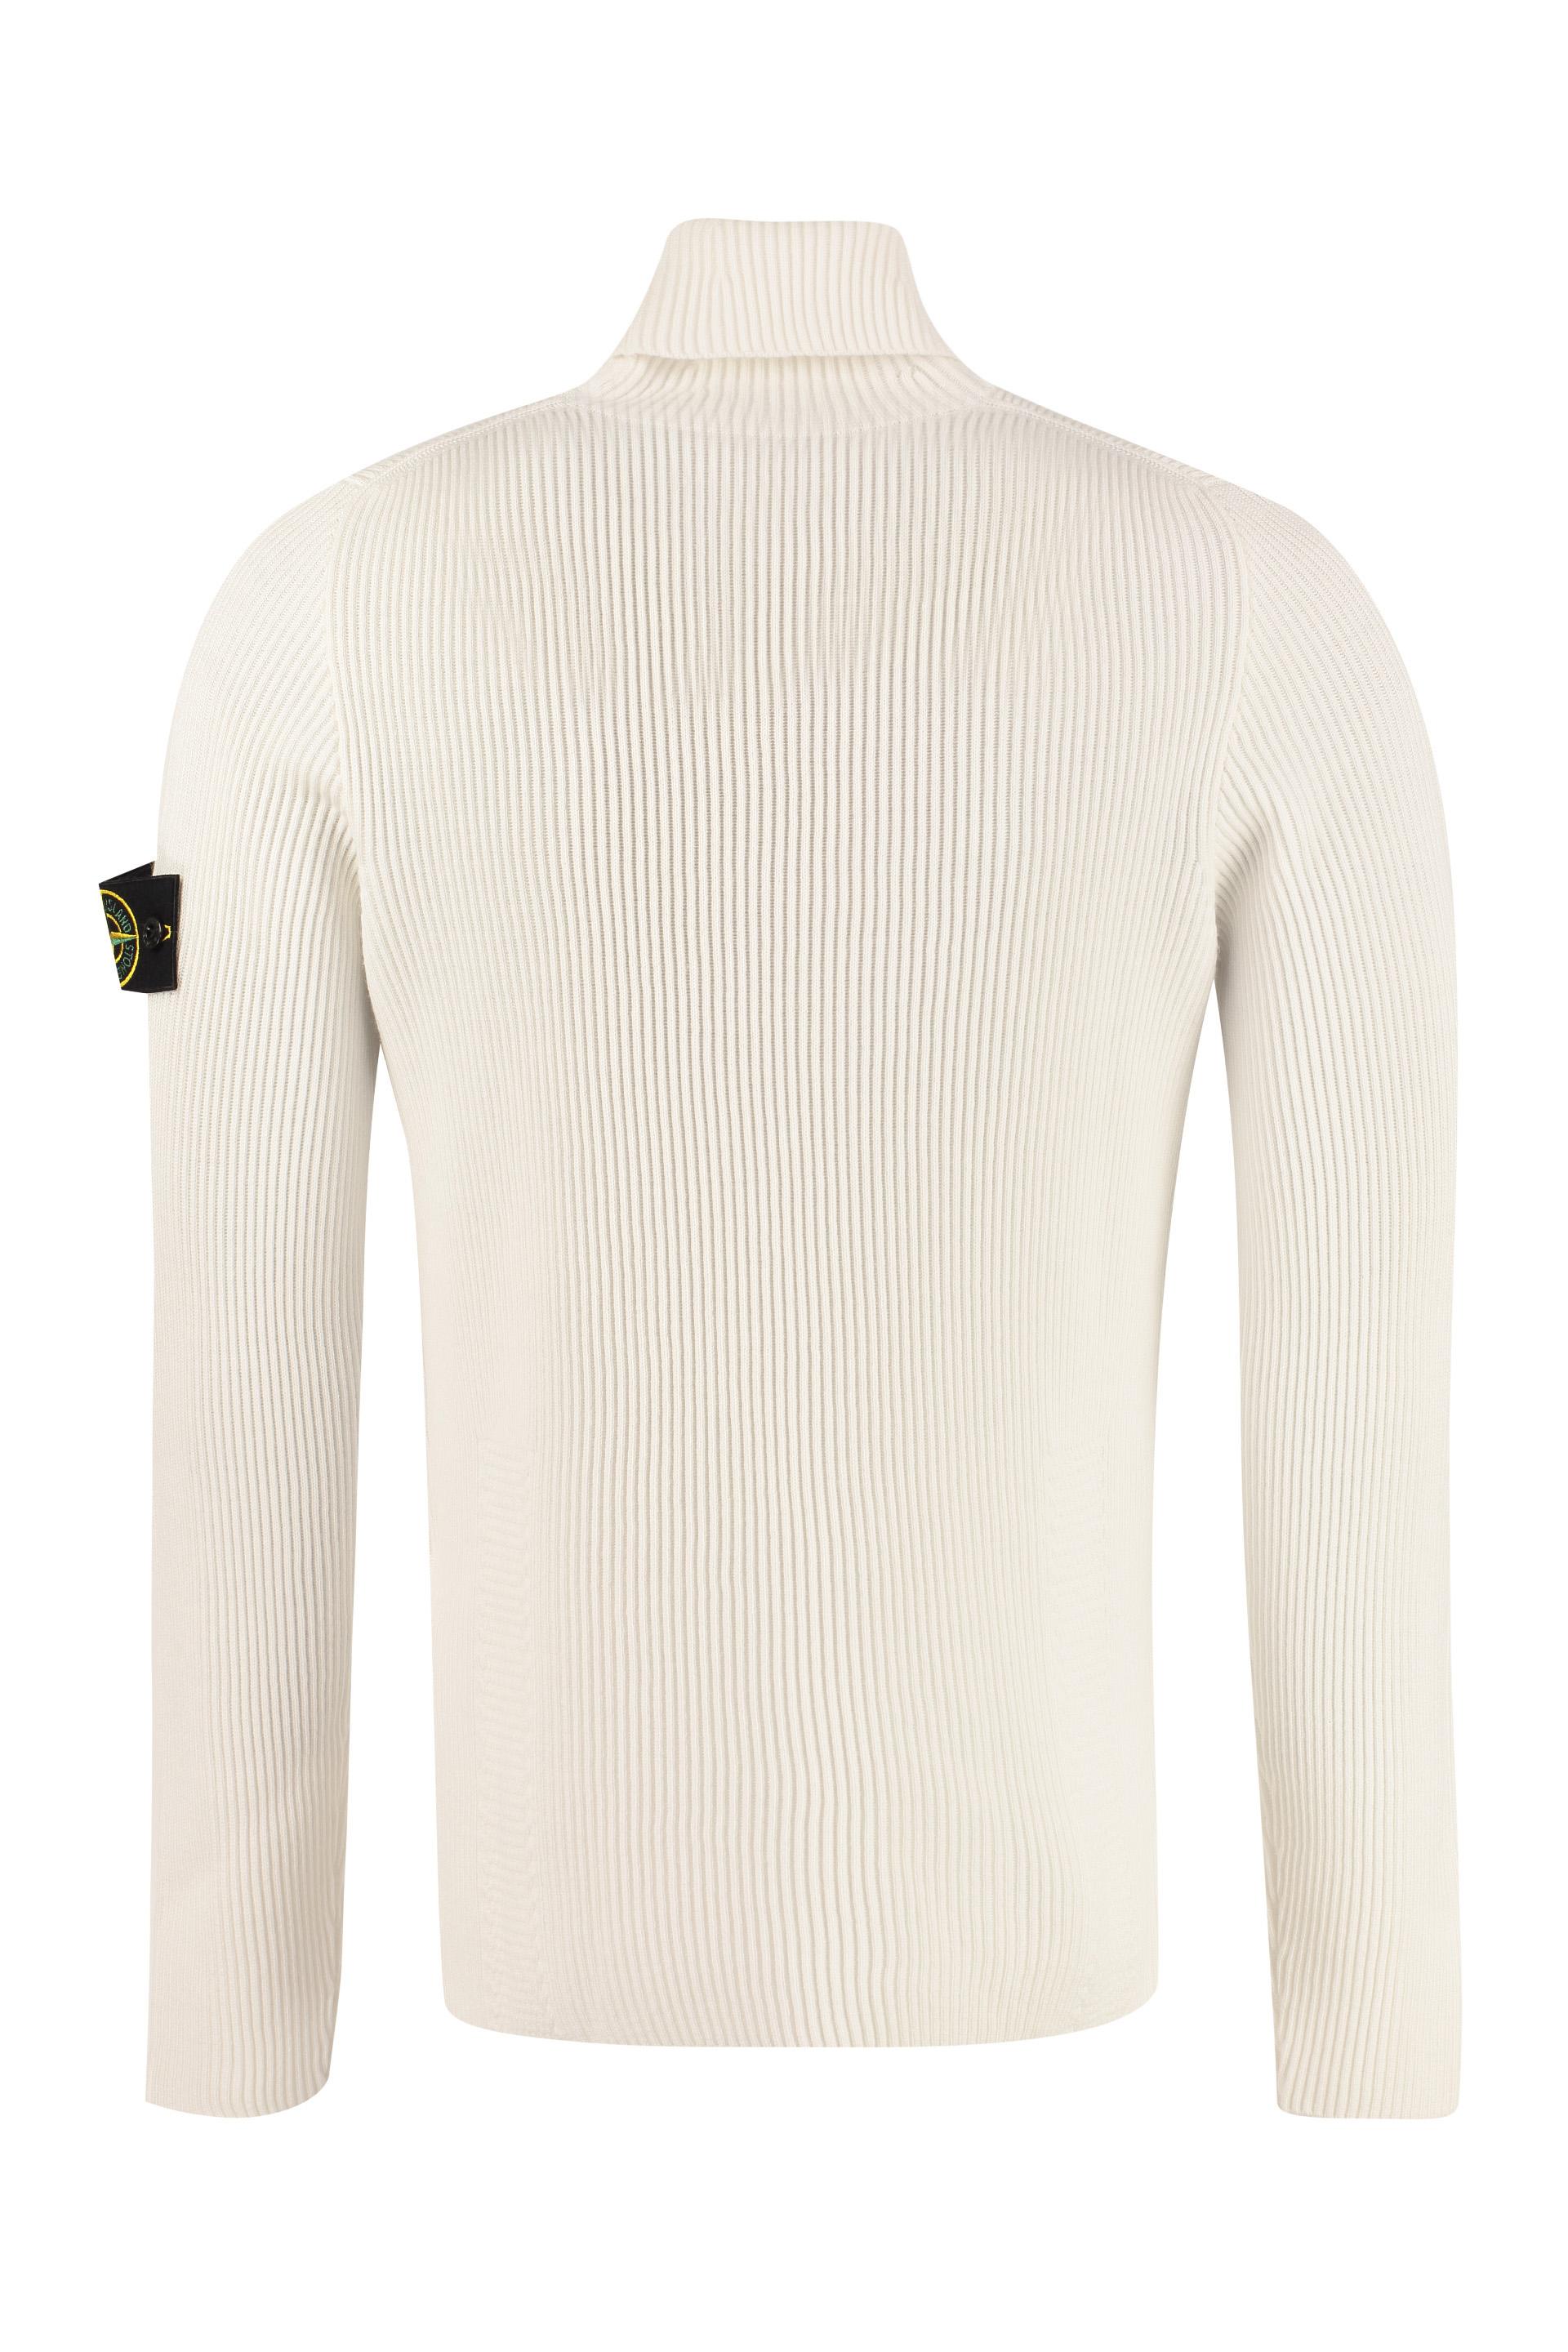 Stone Island Ribbed Wool Turtleneck Sweater in White for Men | Lyst